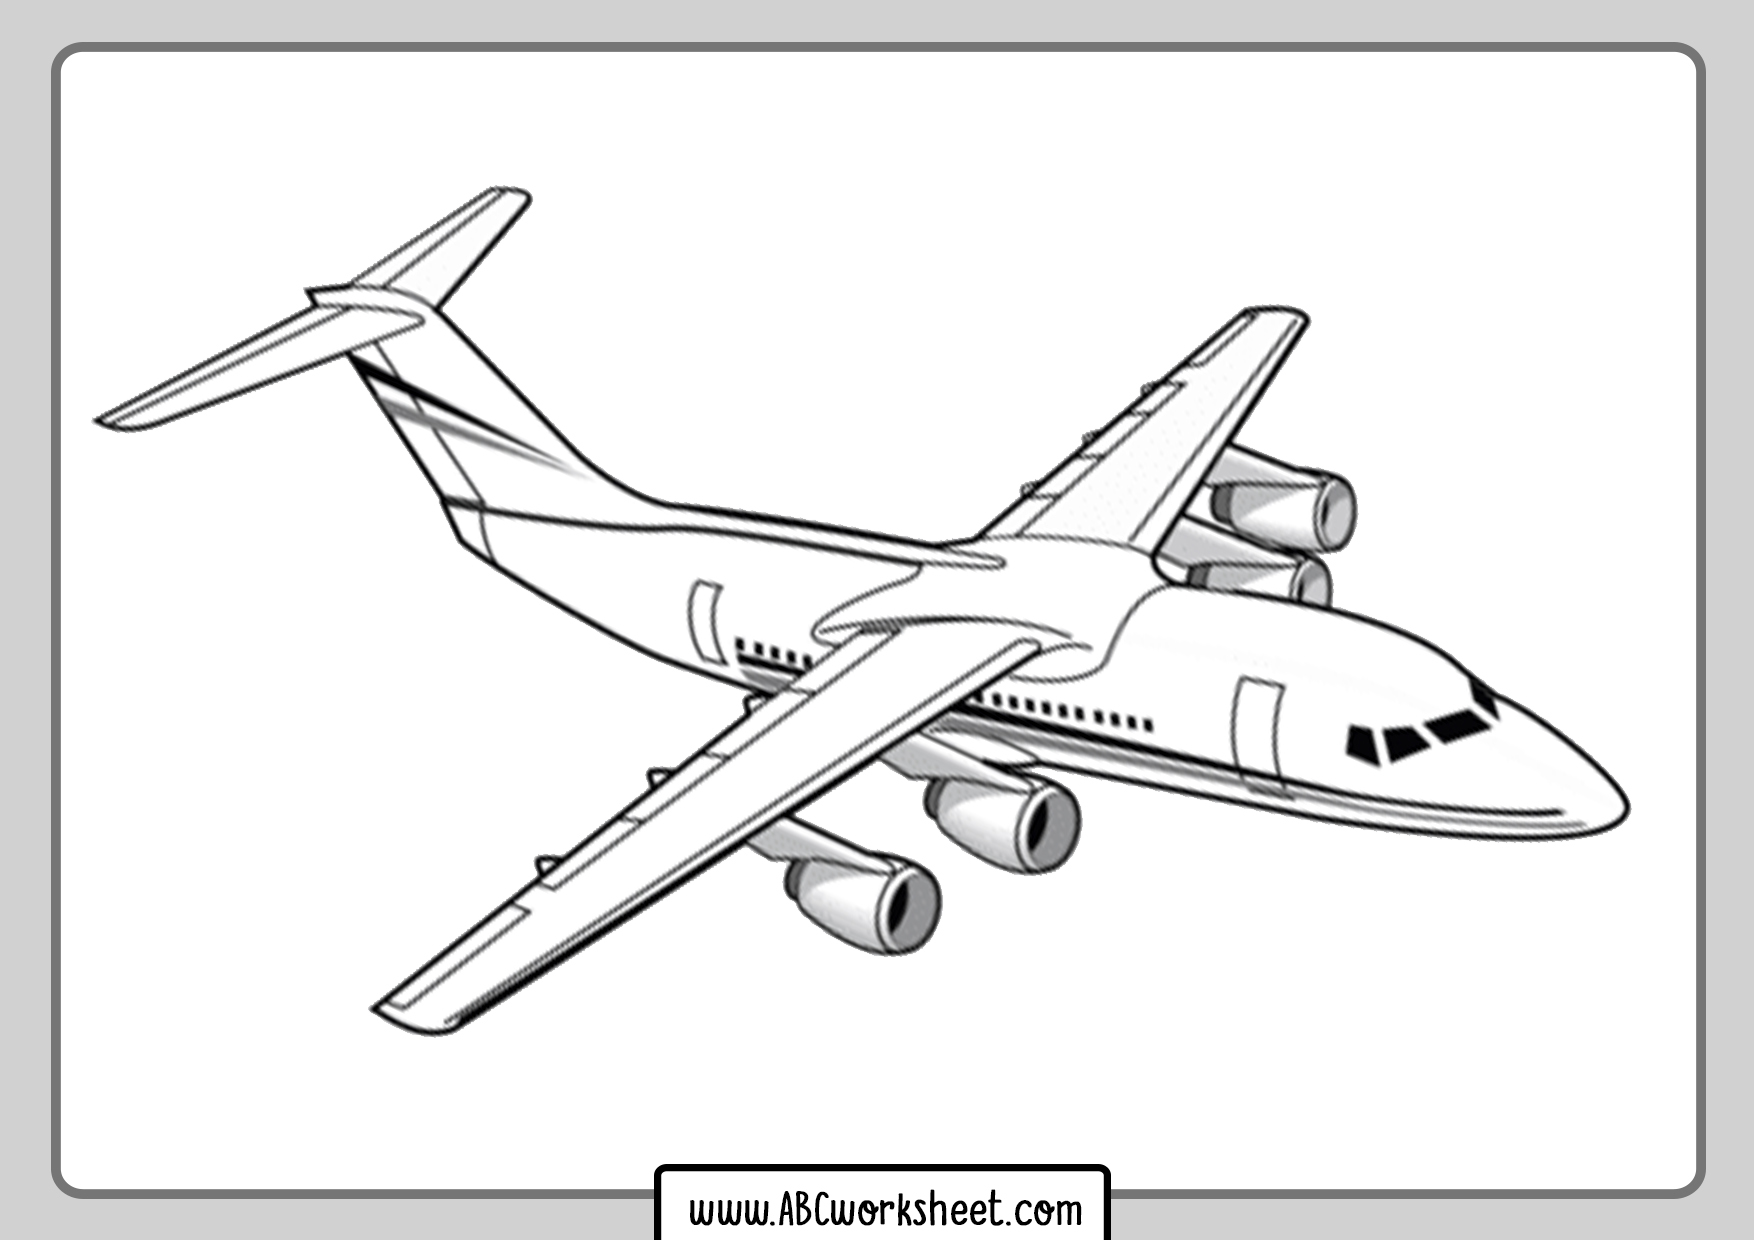 Jet Airplane Coloring Page - 254+ Amazing SVG File